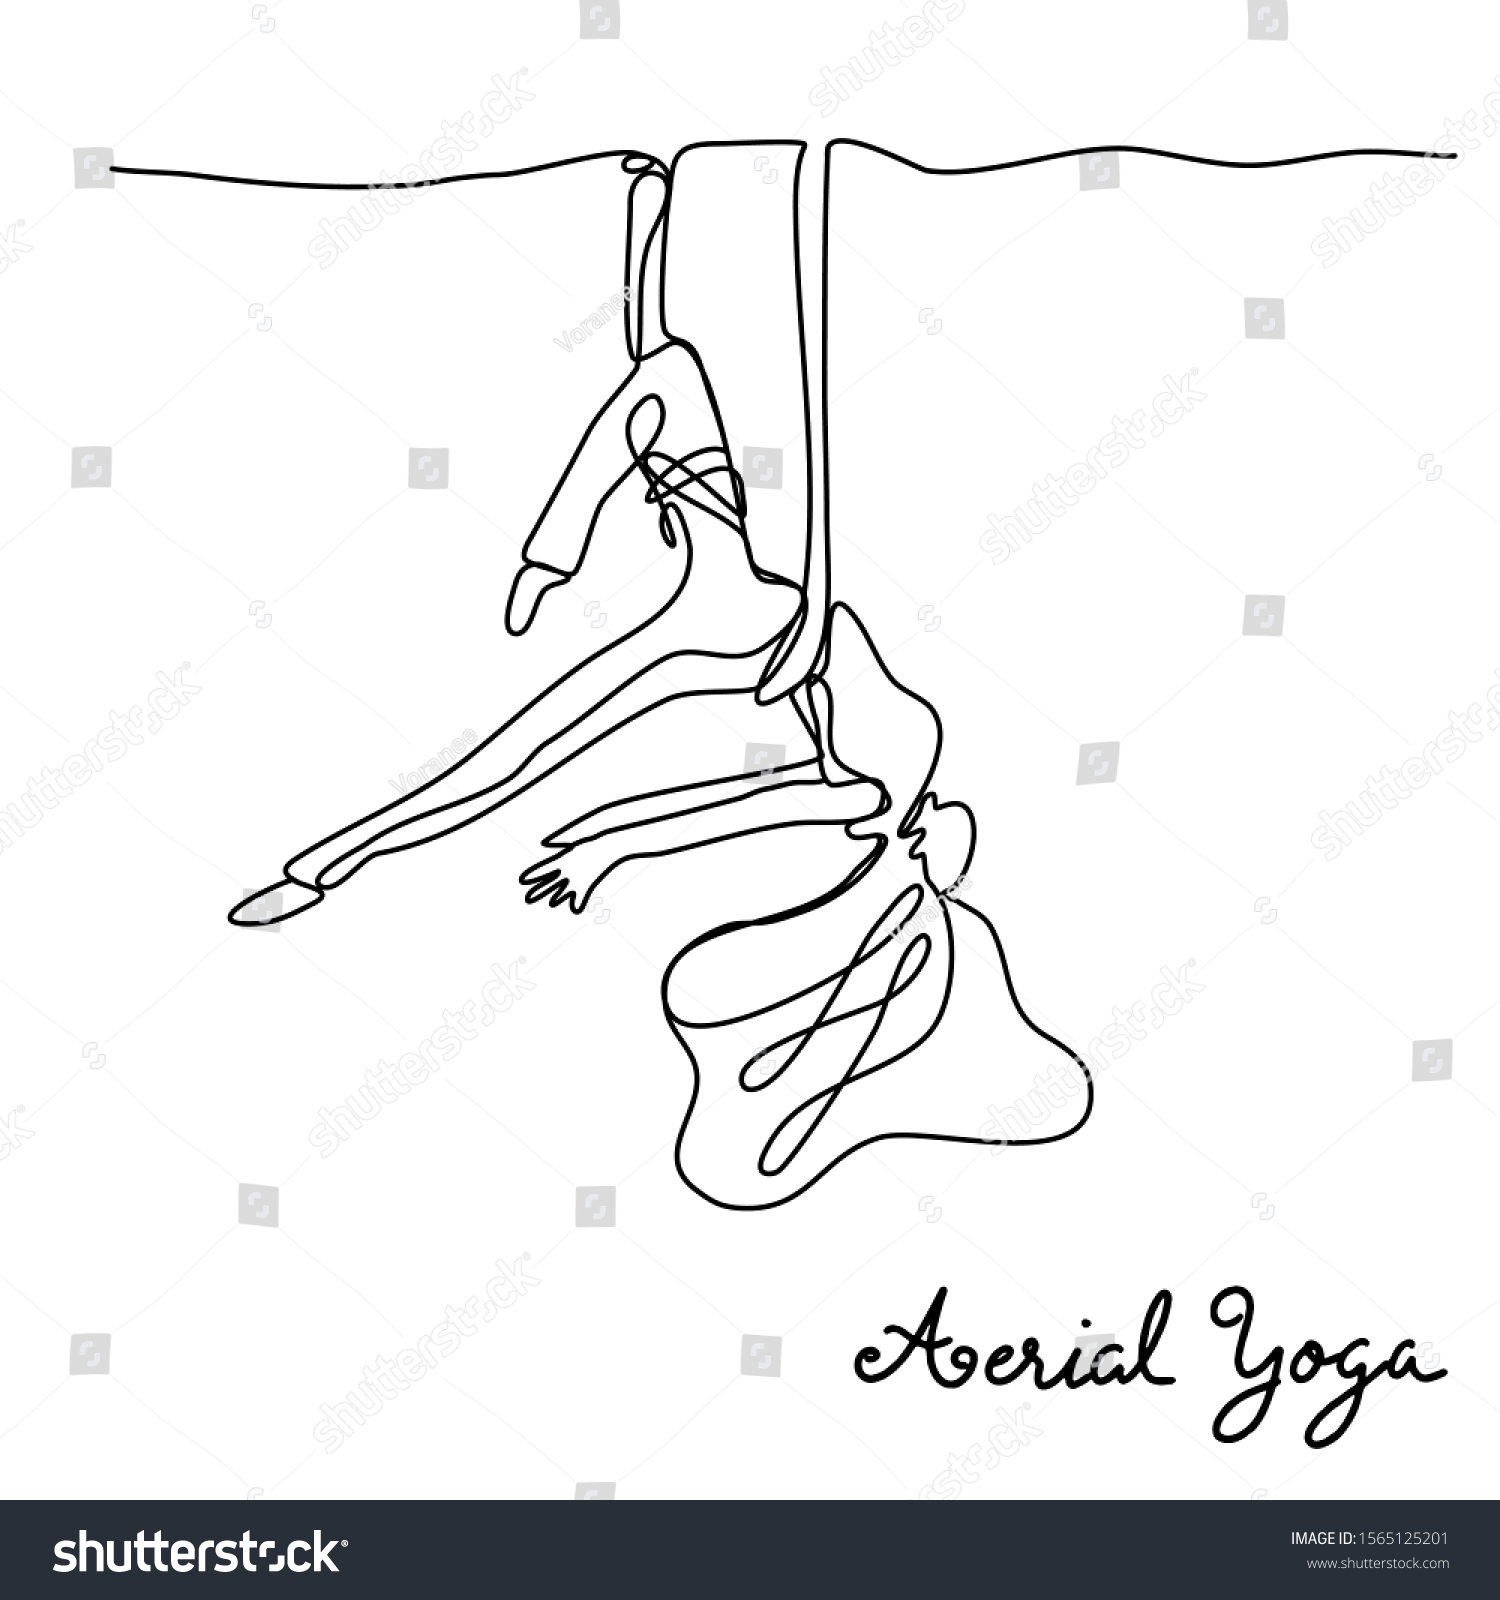 Continuous Black White Hand Drawn Line Stock Vector Royalty Free Shutterstock